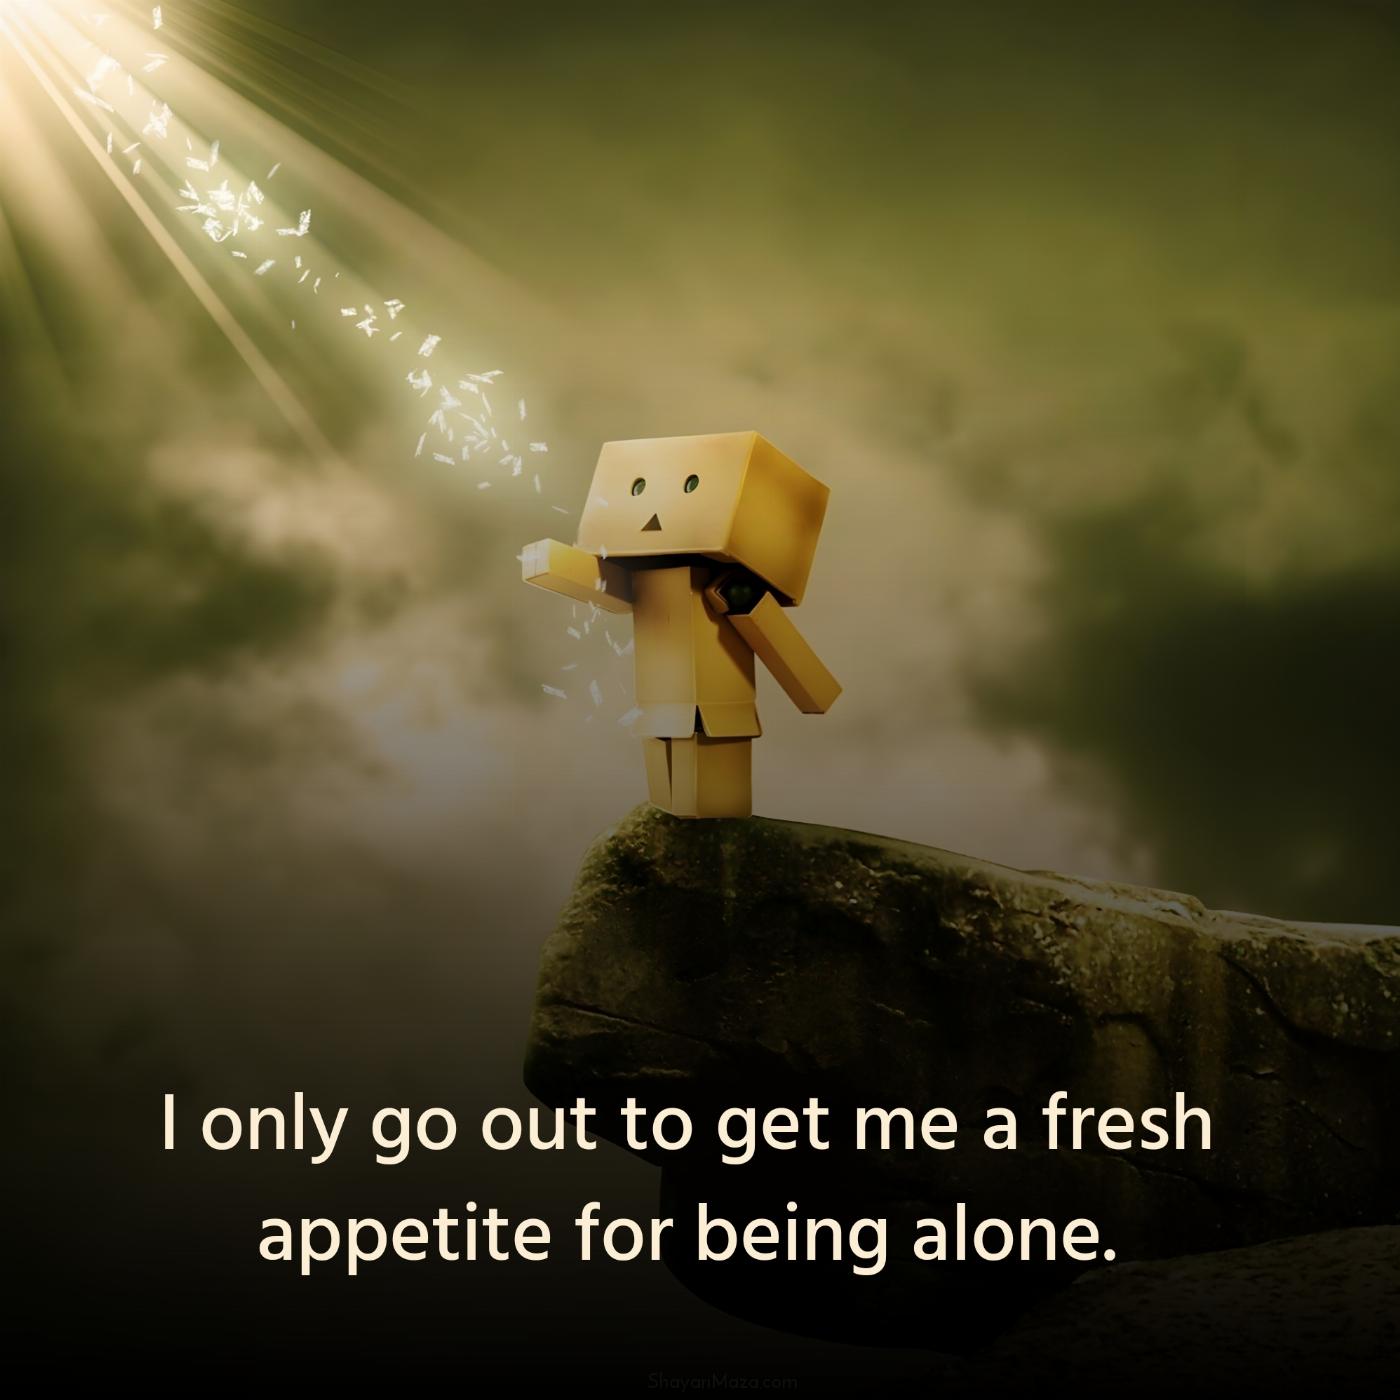 I only go out to get me a fresh appetite for being alone